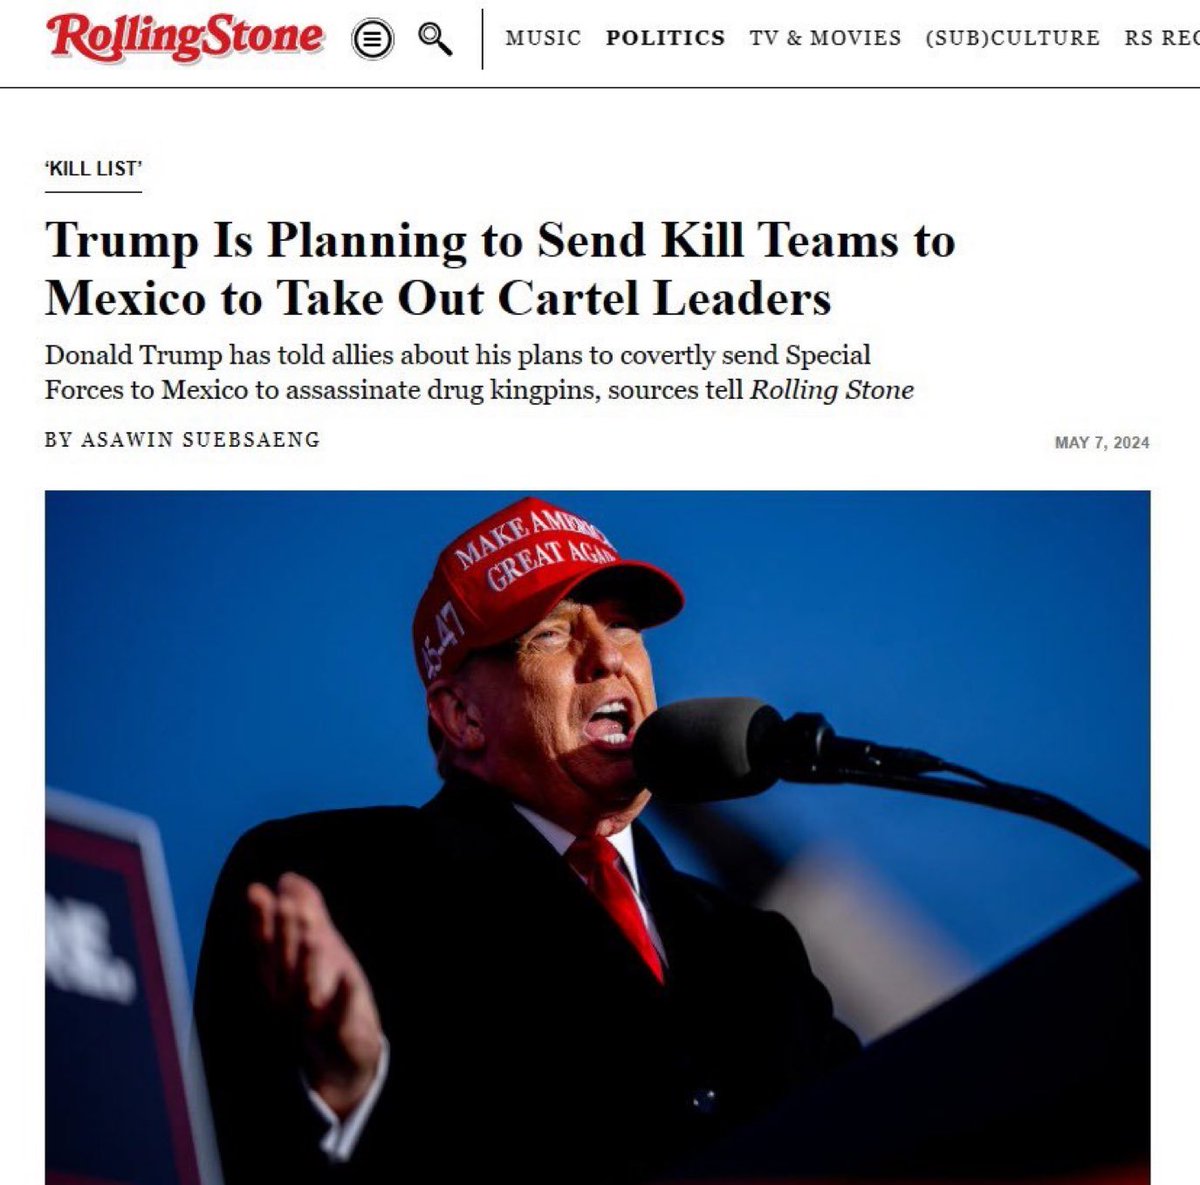 It's incredible that the good people at Rolling Stone think this will make people dislike Trump.